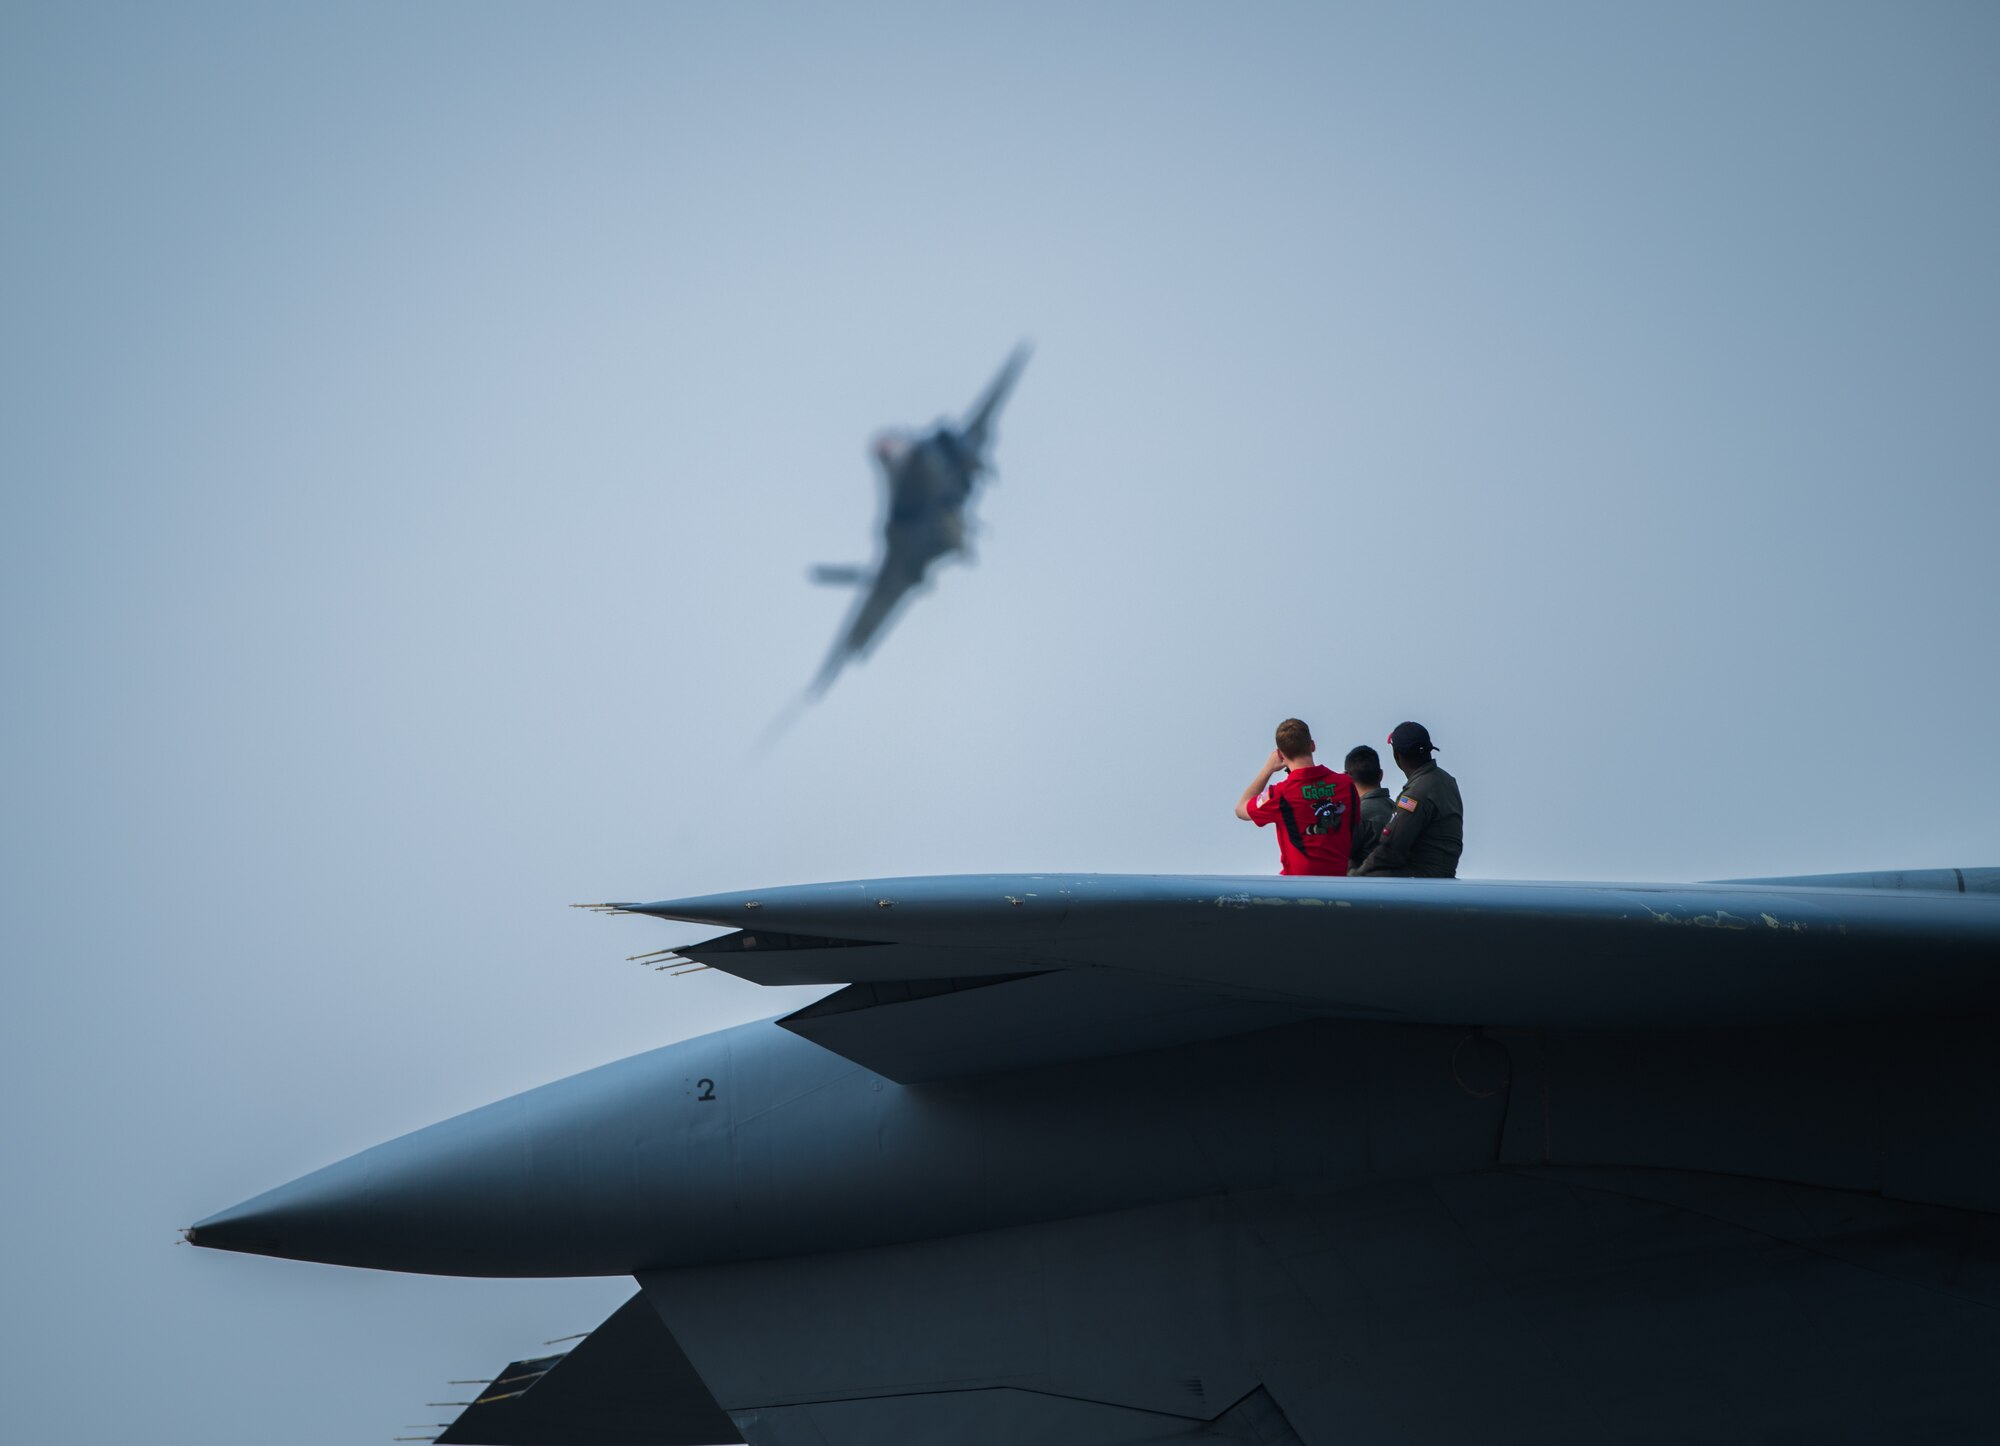 Airshow guests watch as Capt. Andrew “Dojo”Olson, F-35 Demonstration Team pilot and commander performs aerial maneuvers in an F-35A Lightning II during the Arctic Lightning Airshow July 13, 2019, at Eielson Air Force Base, Alaska. Spectators got an up-close look at the Air Force’s newest fighter jet marking the airshow since 2008. (U.S. Air Force photo by Senior Airman Alexander Cook)